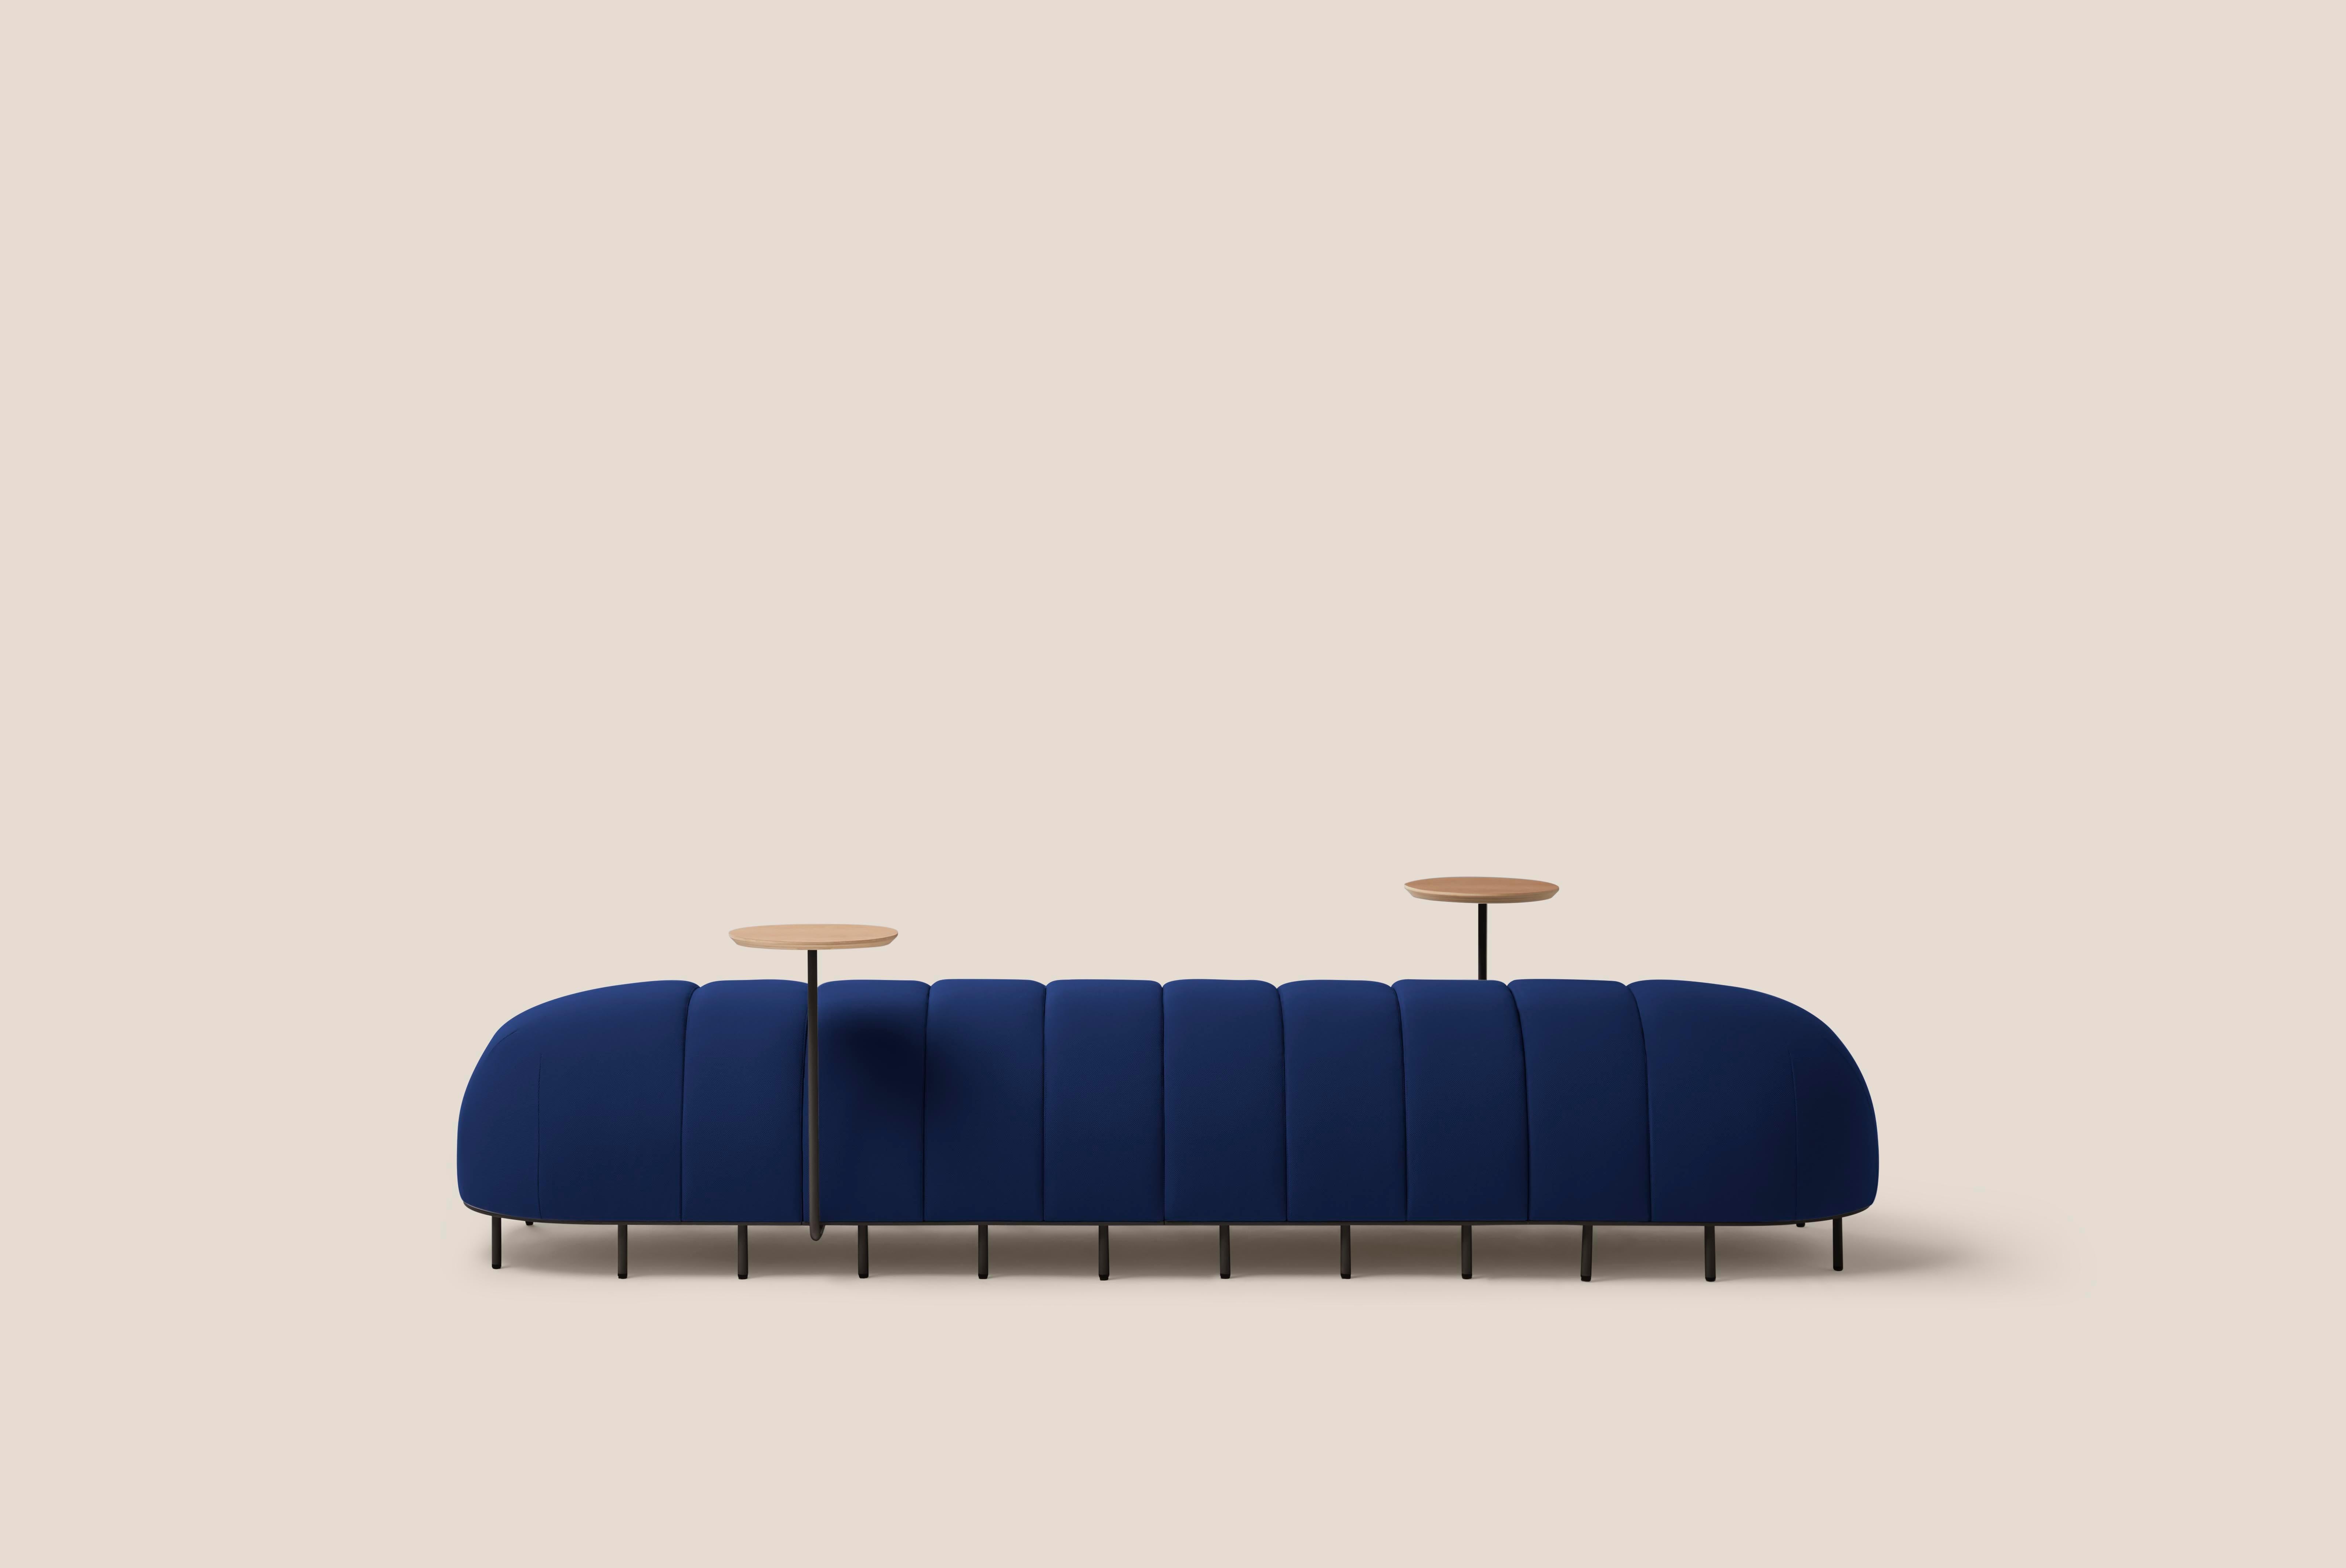 Dark Blue Worm Bench VI by Pepe Albargues
Dimensions: D 65 x W 230 x H 50 cm
Materials: Plywood, foam CMHR, iron
Available in different colors. Custom modules convinations available

2 x straight module
2 x end module
2 x side table

Worm is an